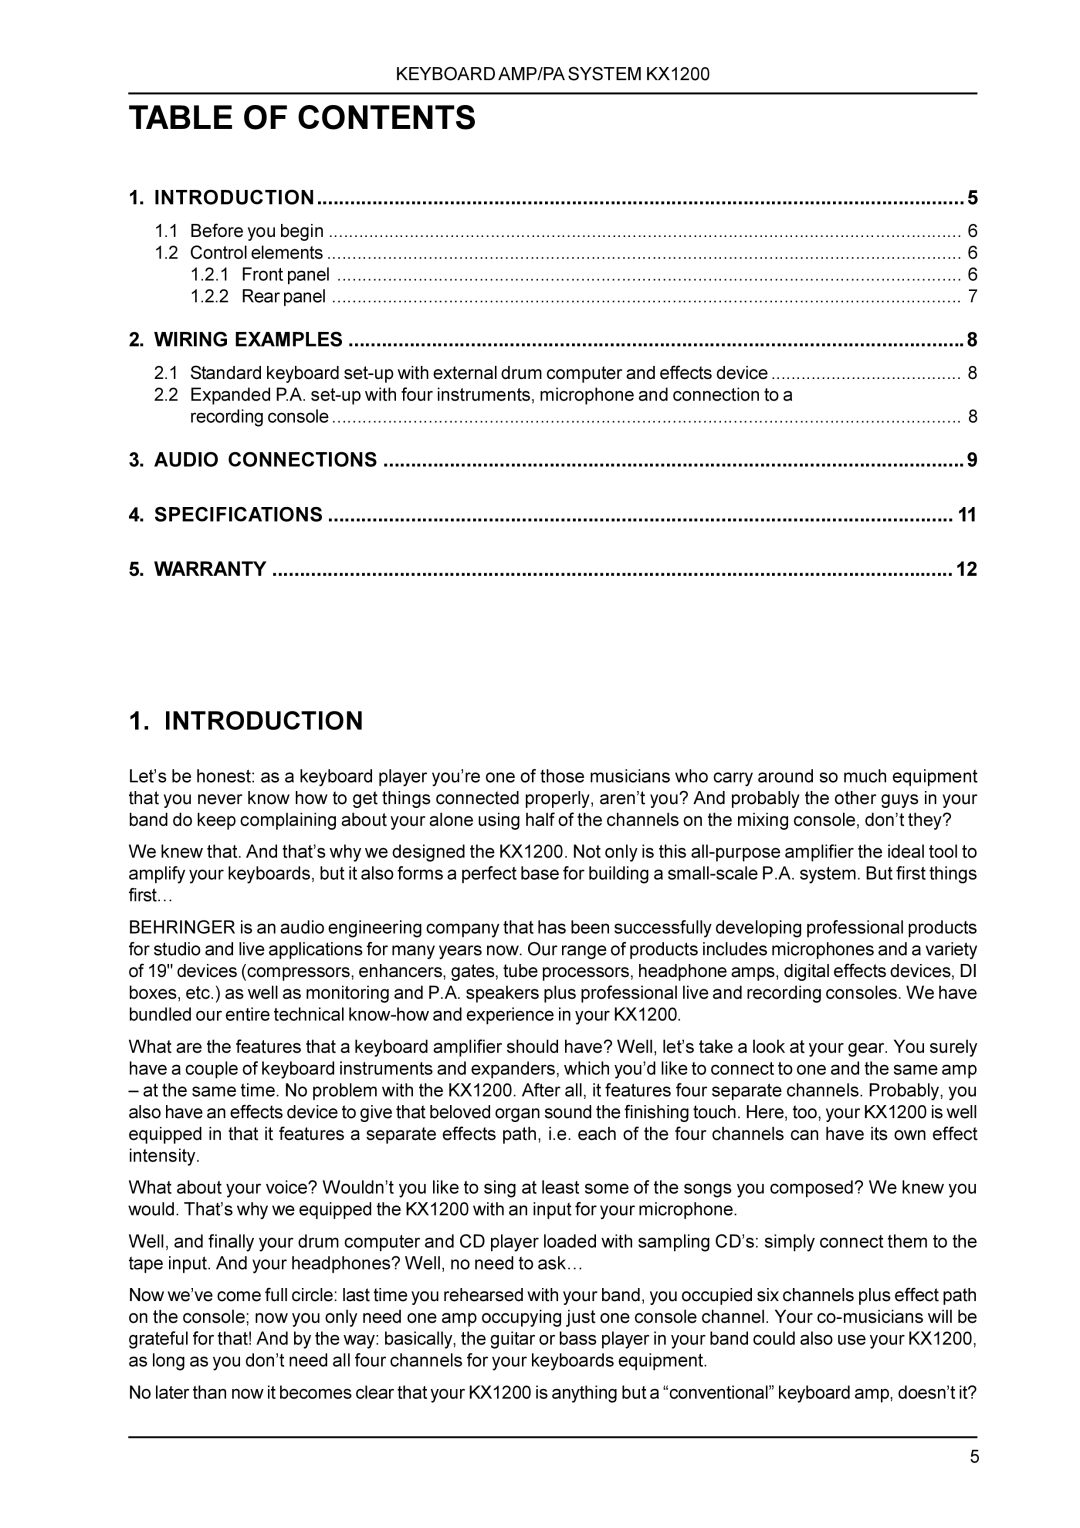 Behringer KX1200 manual Introduction, Table Of Contents 